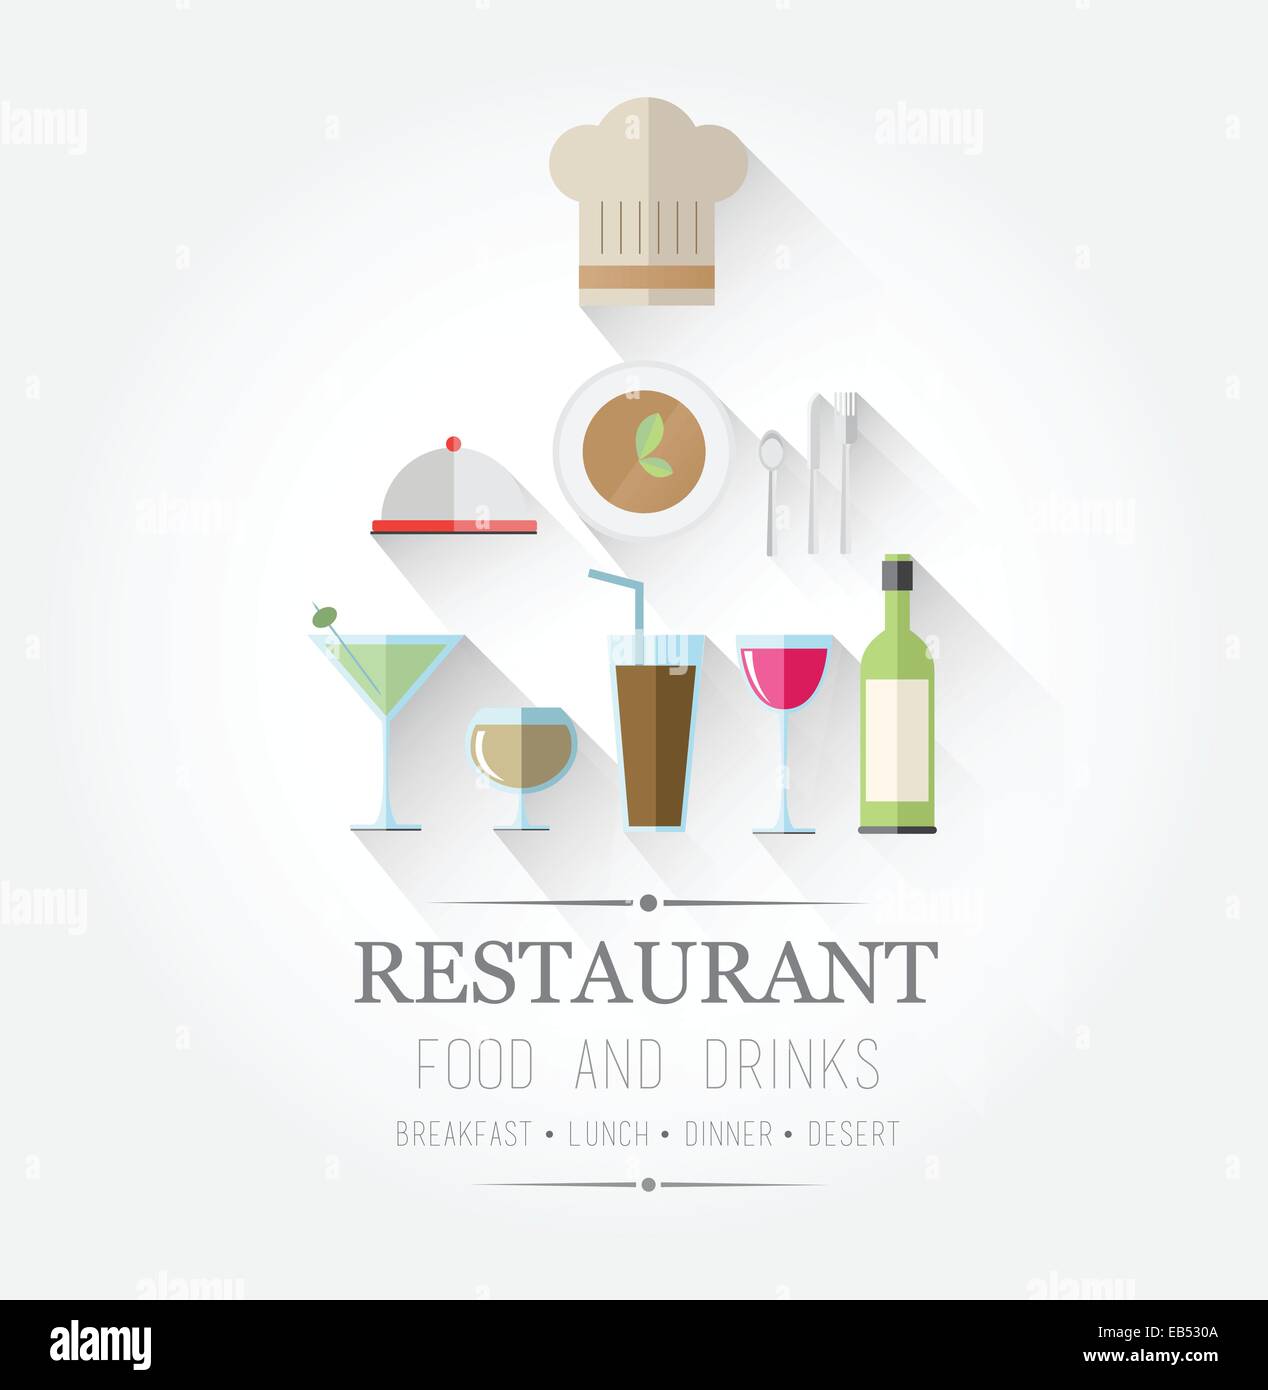 Food and drinks icons with text Stock Vector